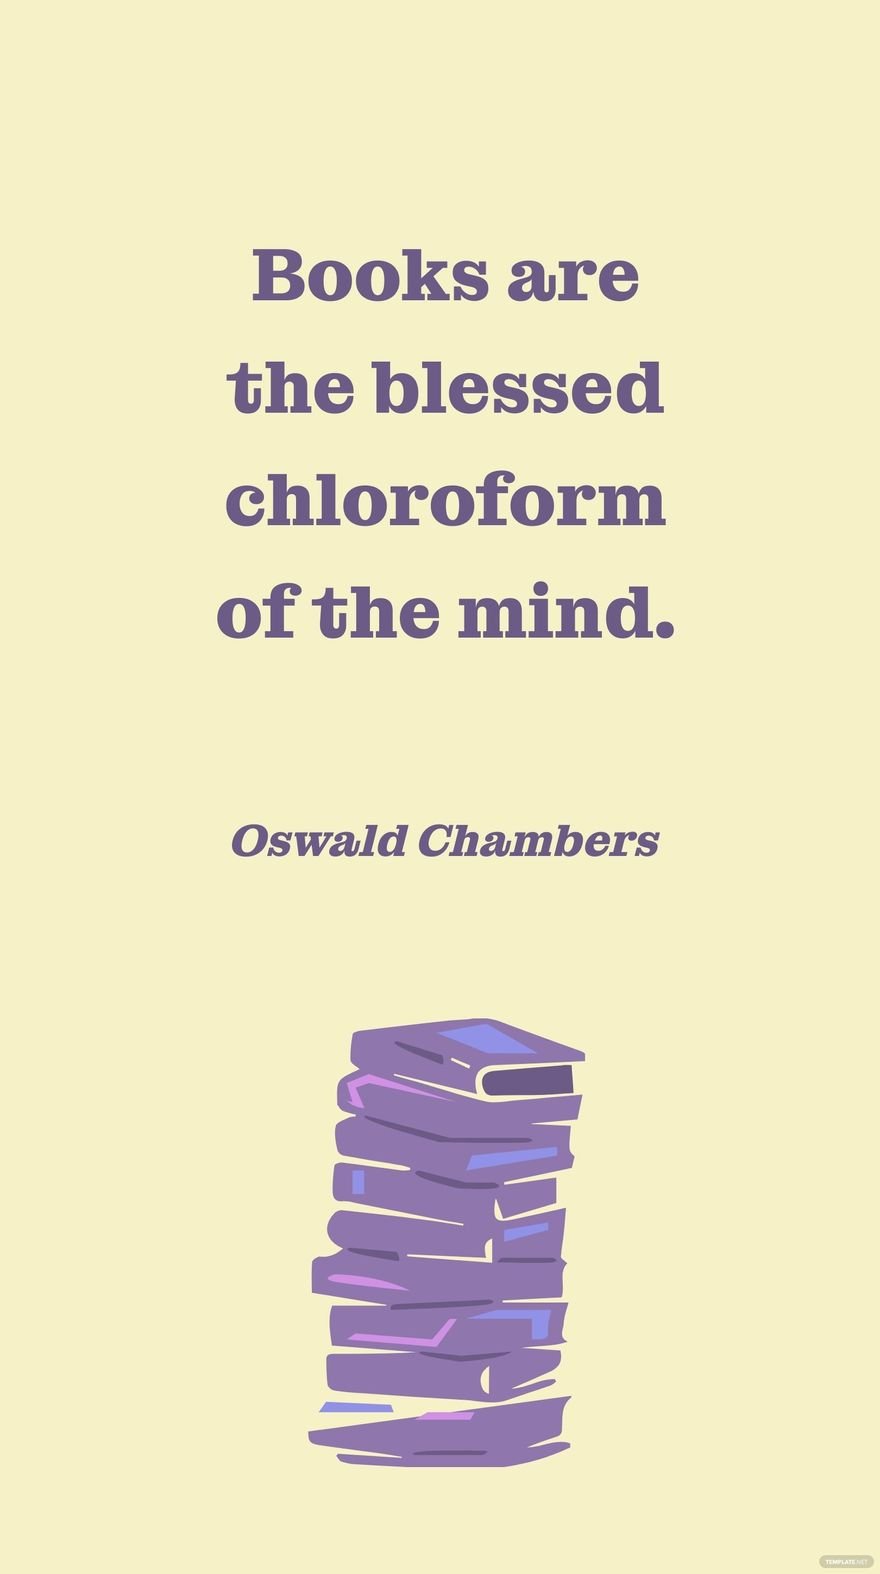 Oswald Chambers - Books are the blessed chloroform of the mind. in JPG